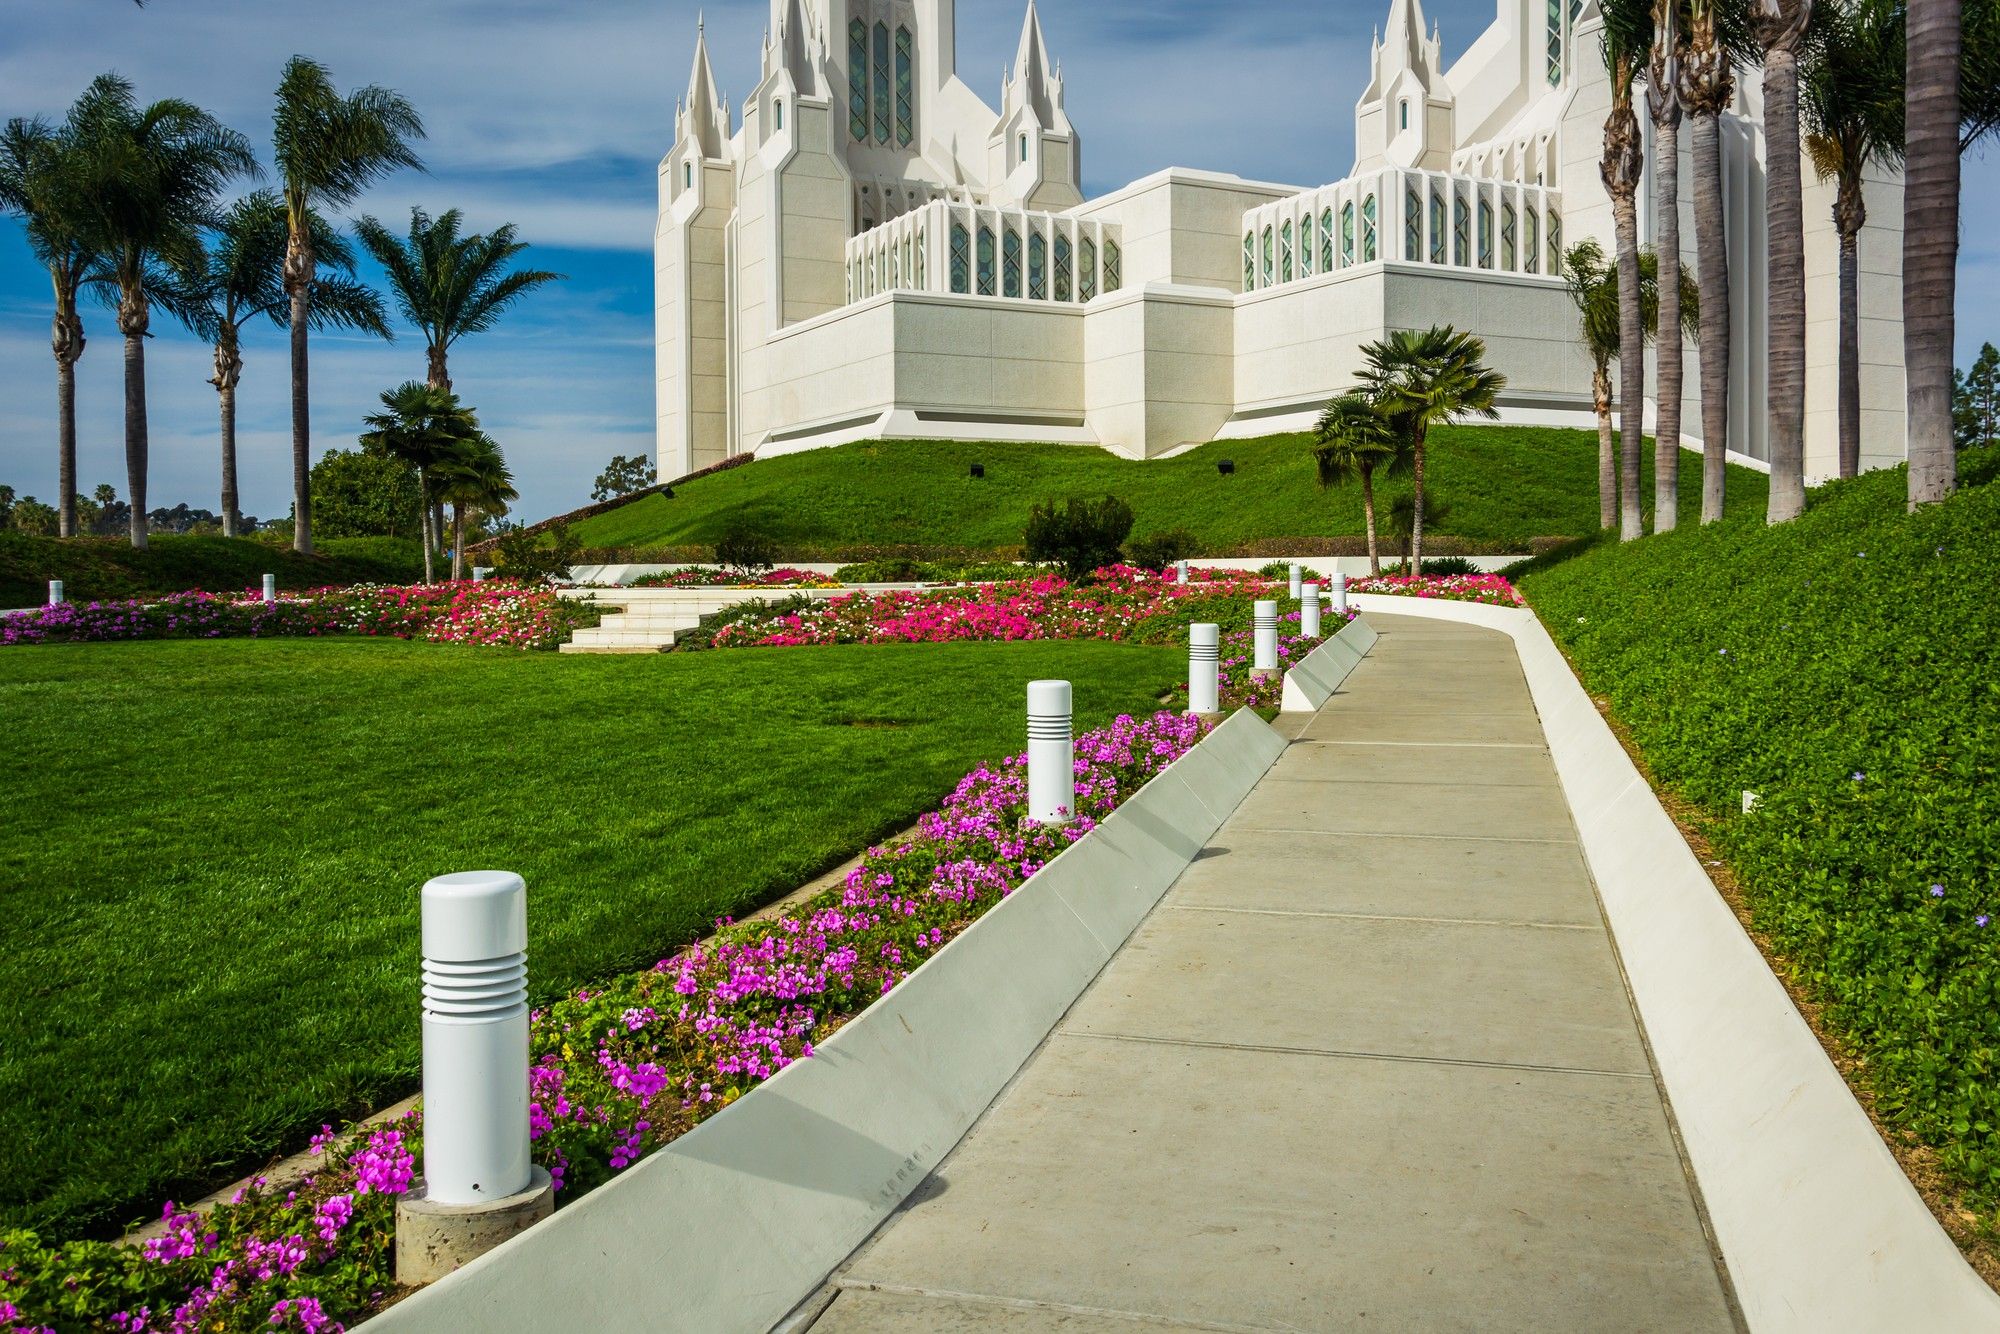 A Mormon Church abuse hotline may have been misused.